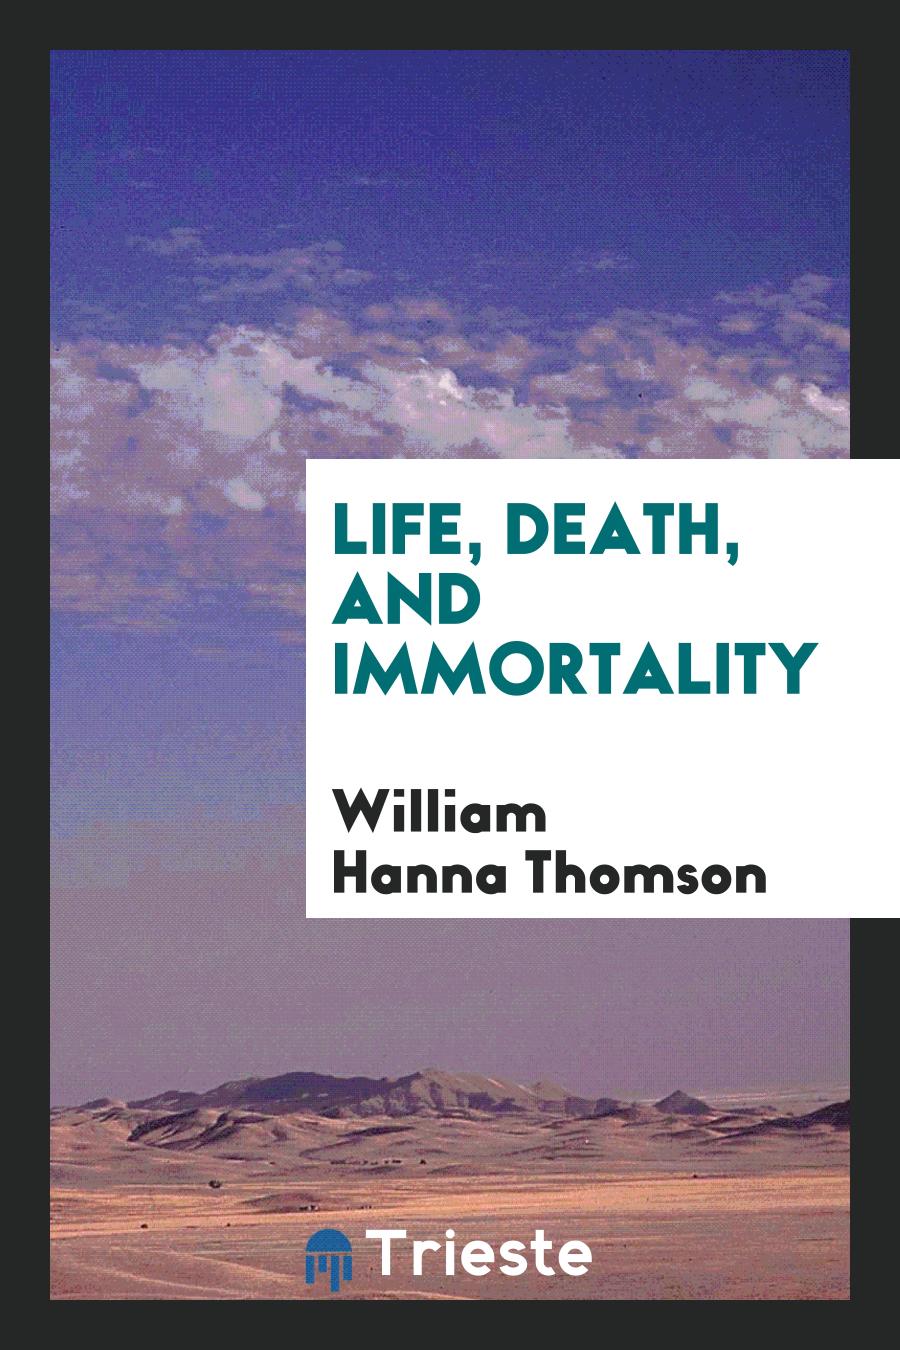 Life, Death, and Immortality